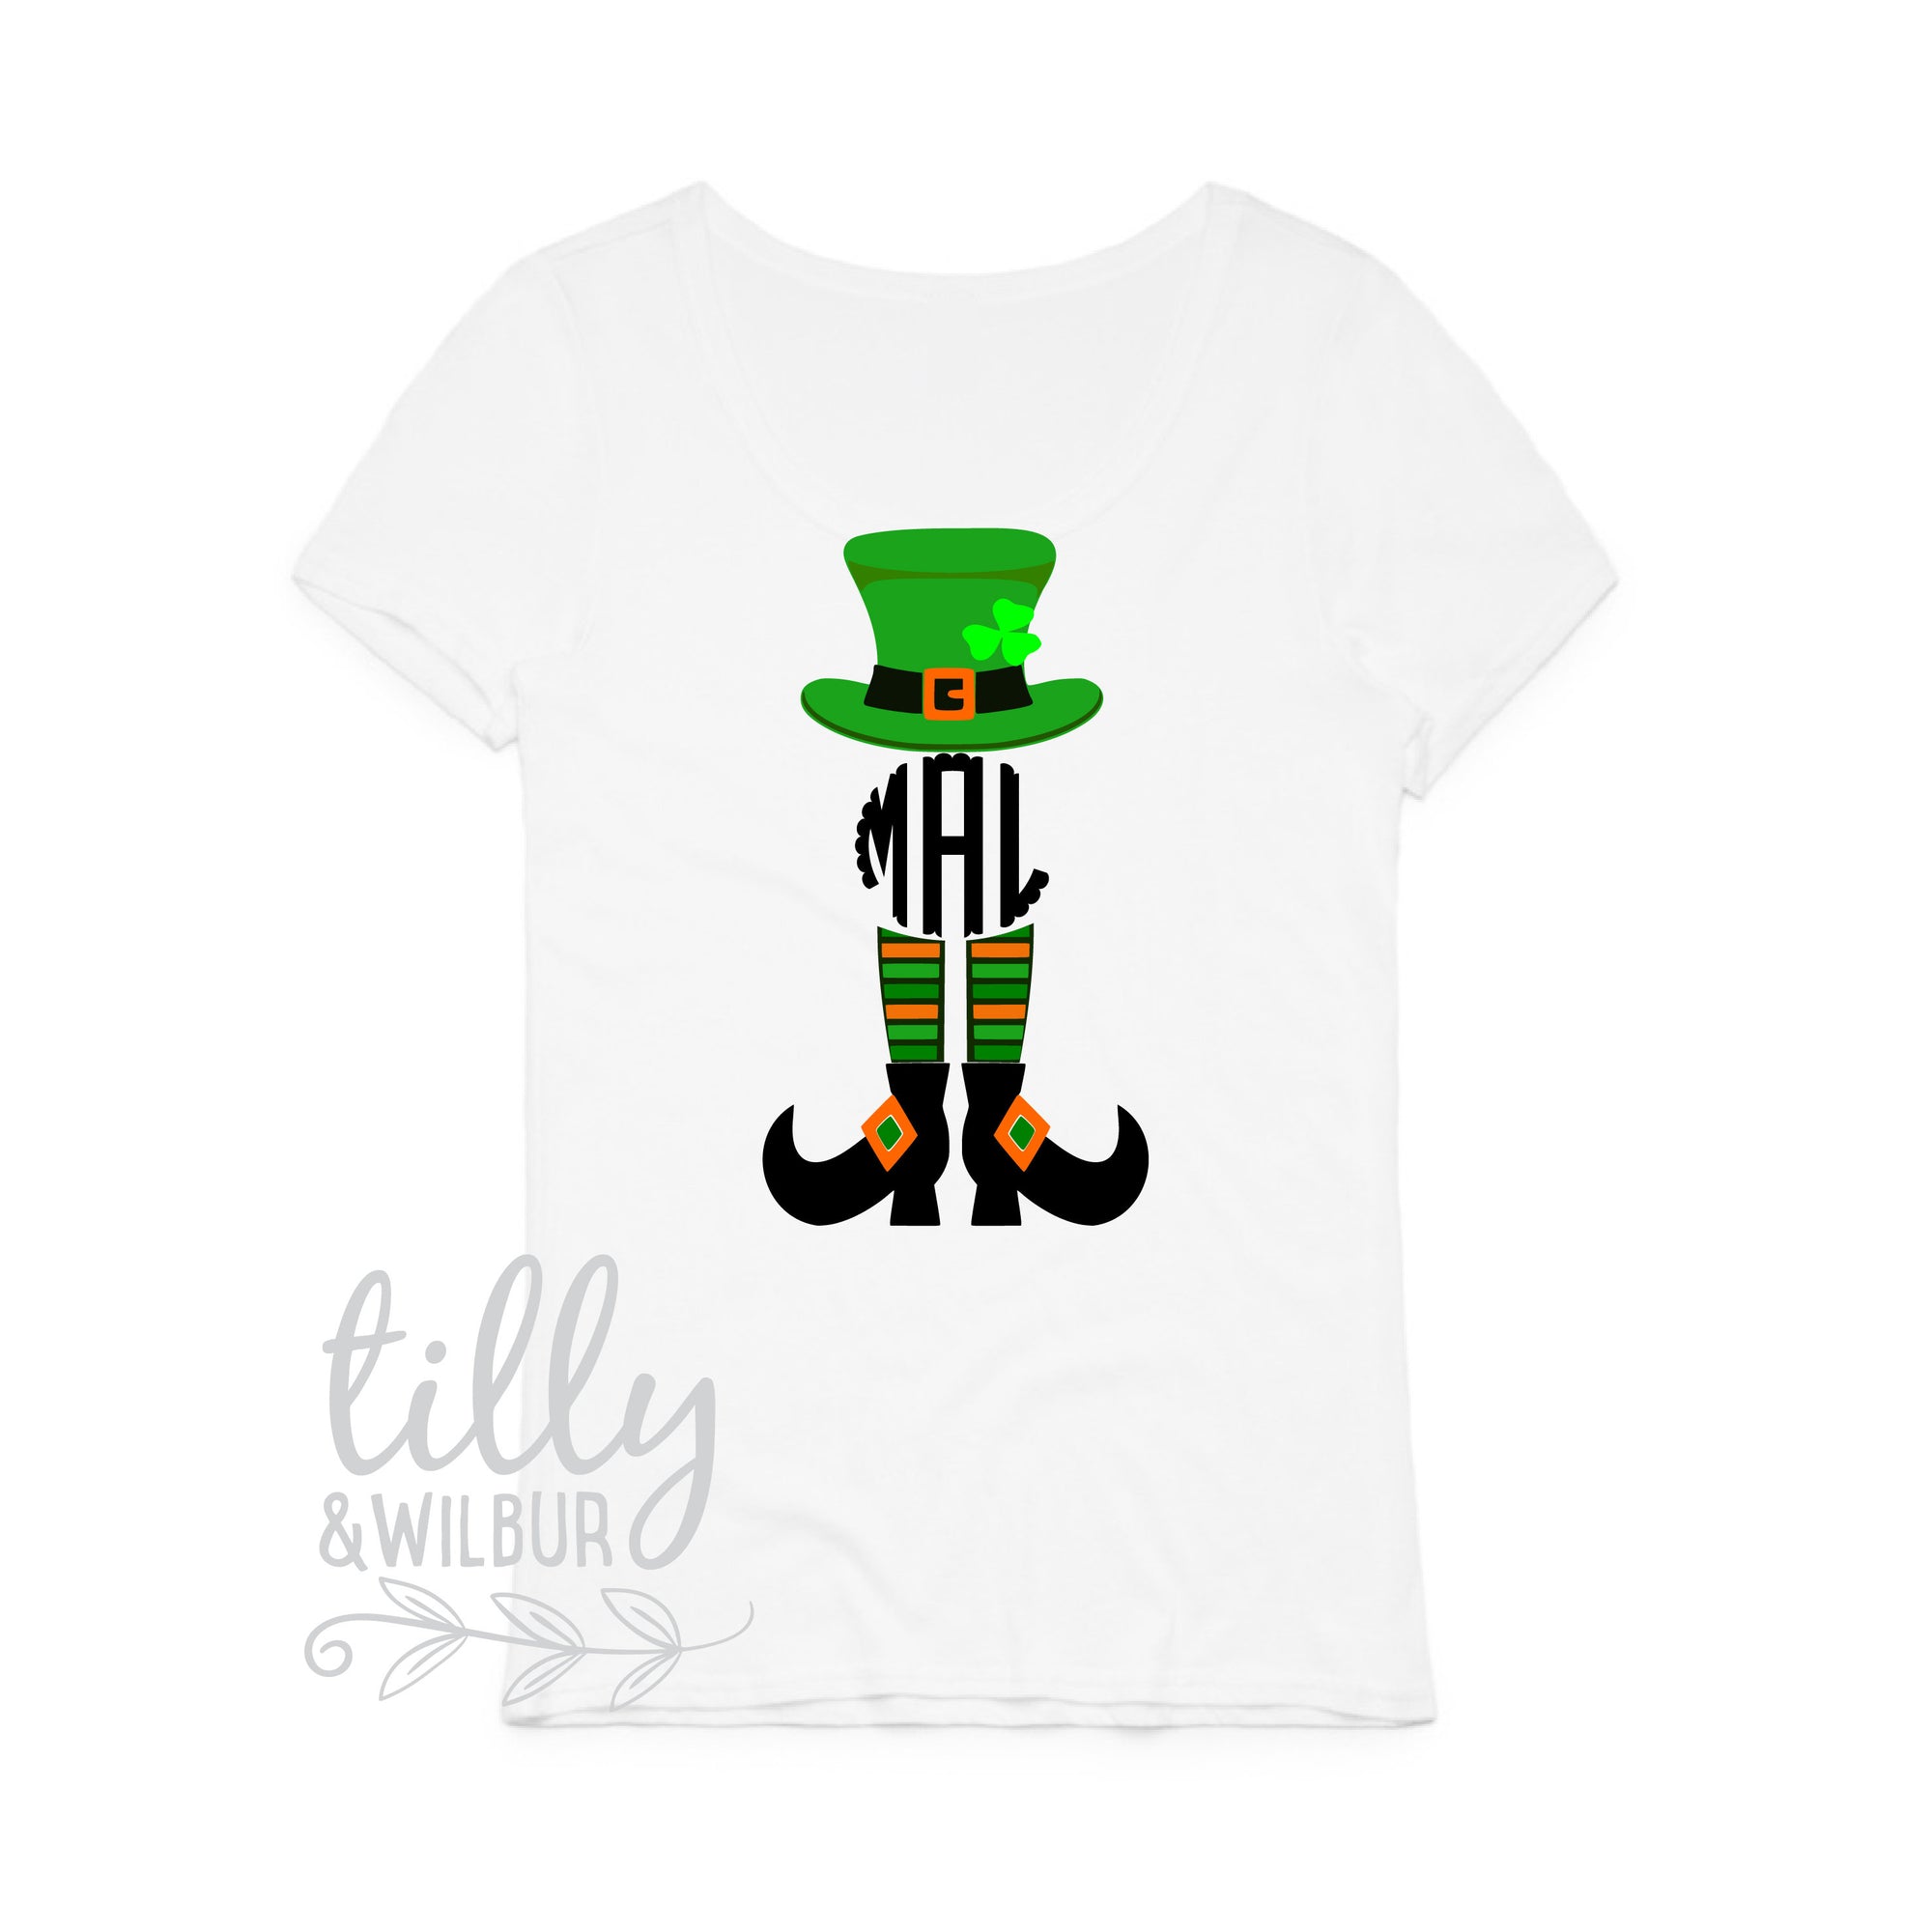 St Patrick's Day Personalised Women's T-Shirt, St Patrick's Day Shirt With Monogram Initials, Happy St Paddy's Day, Ireland, St Patrick